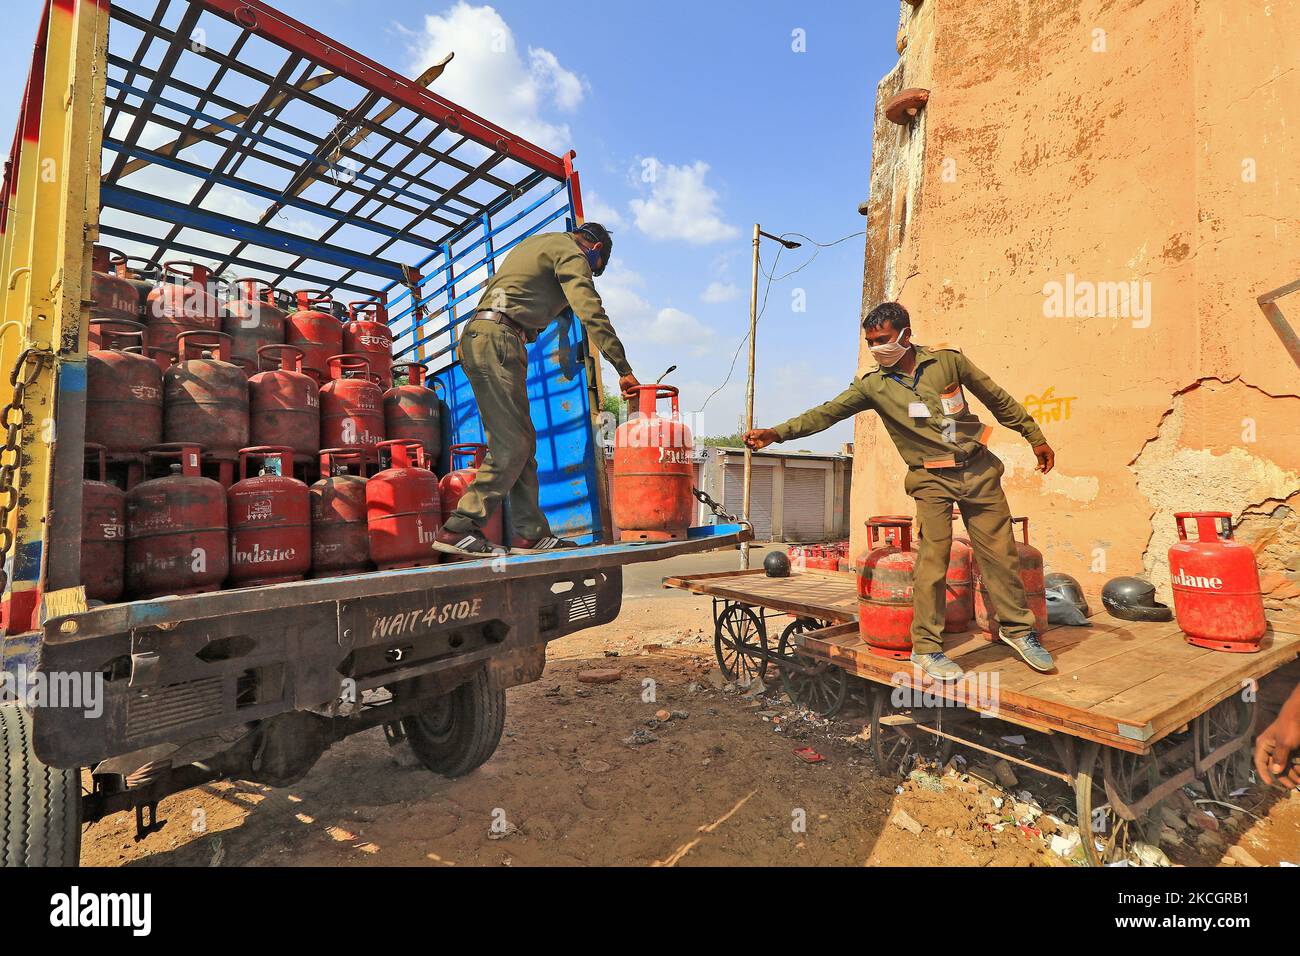 Workers unload LPG gas cylinders from a truck, in Jaipur, Rajasthan, India, on July 2, 2021. The price of non-subsidised LPG cylinders hiked by Rs 25.50 and commercial LPG cylinders hiked by Rs 84. (Photo by Vishal Bhatnagar/NurPhoto) Stock Photo